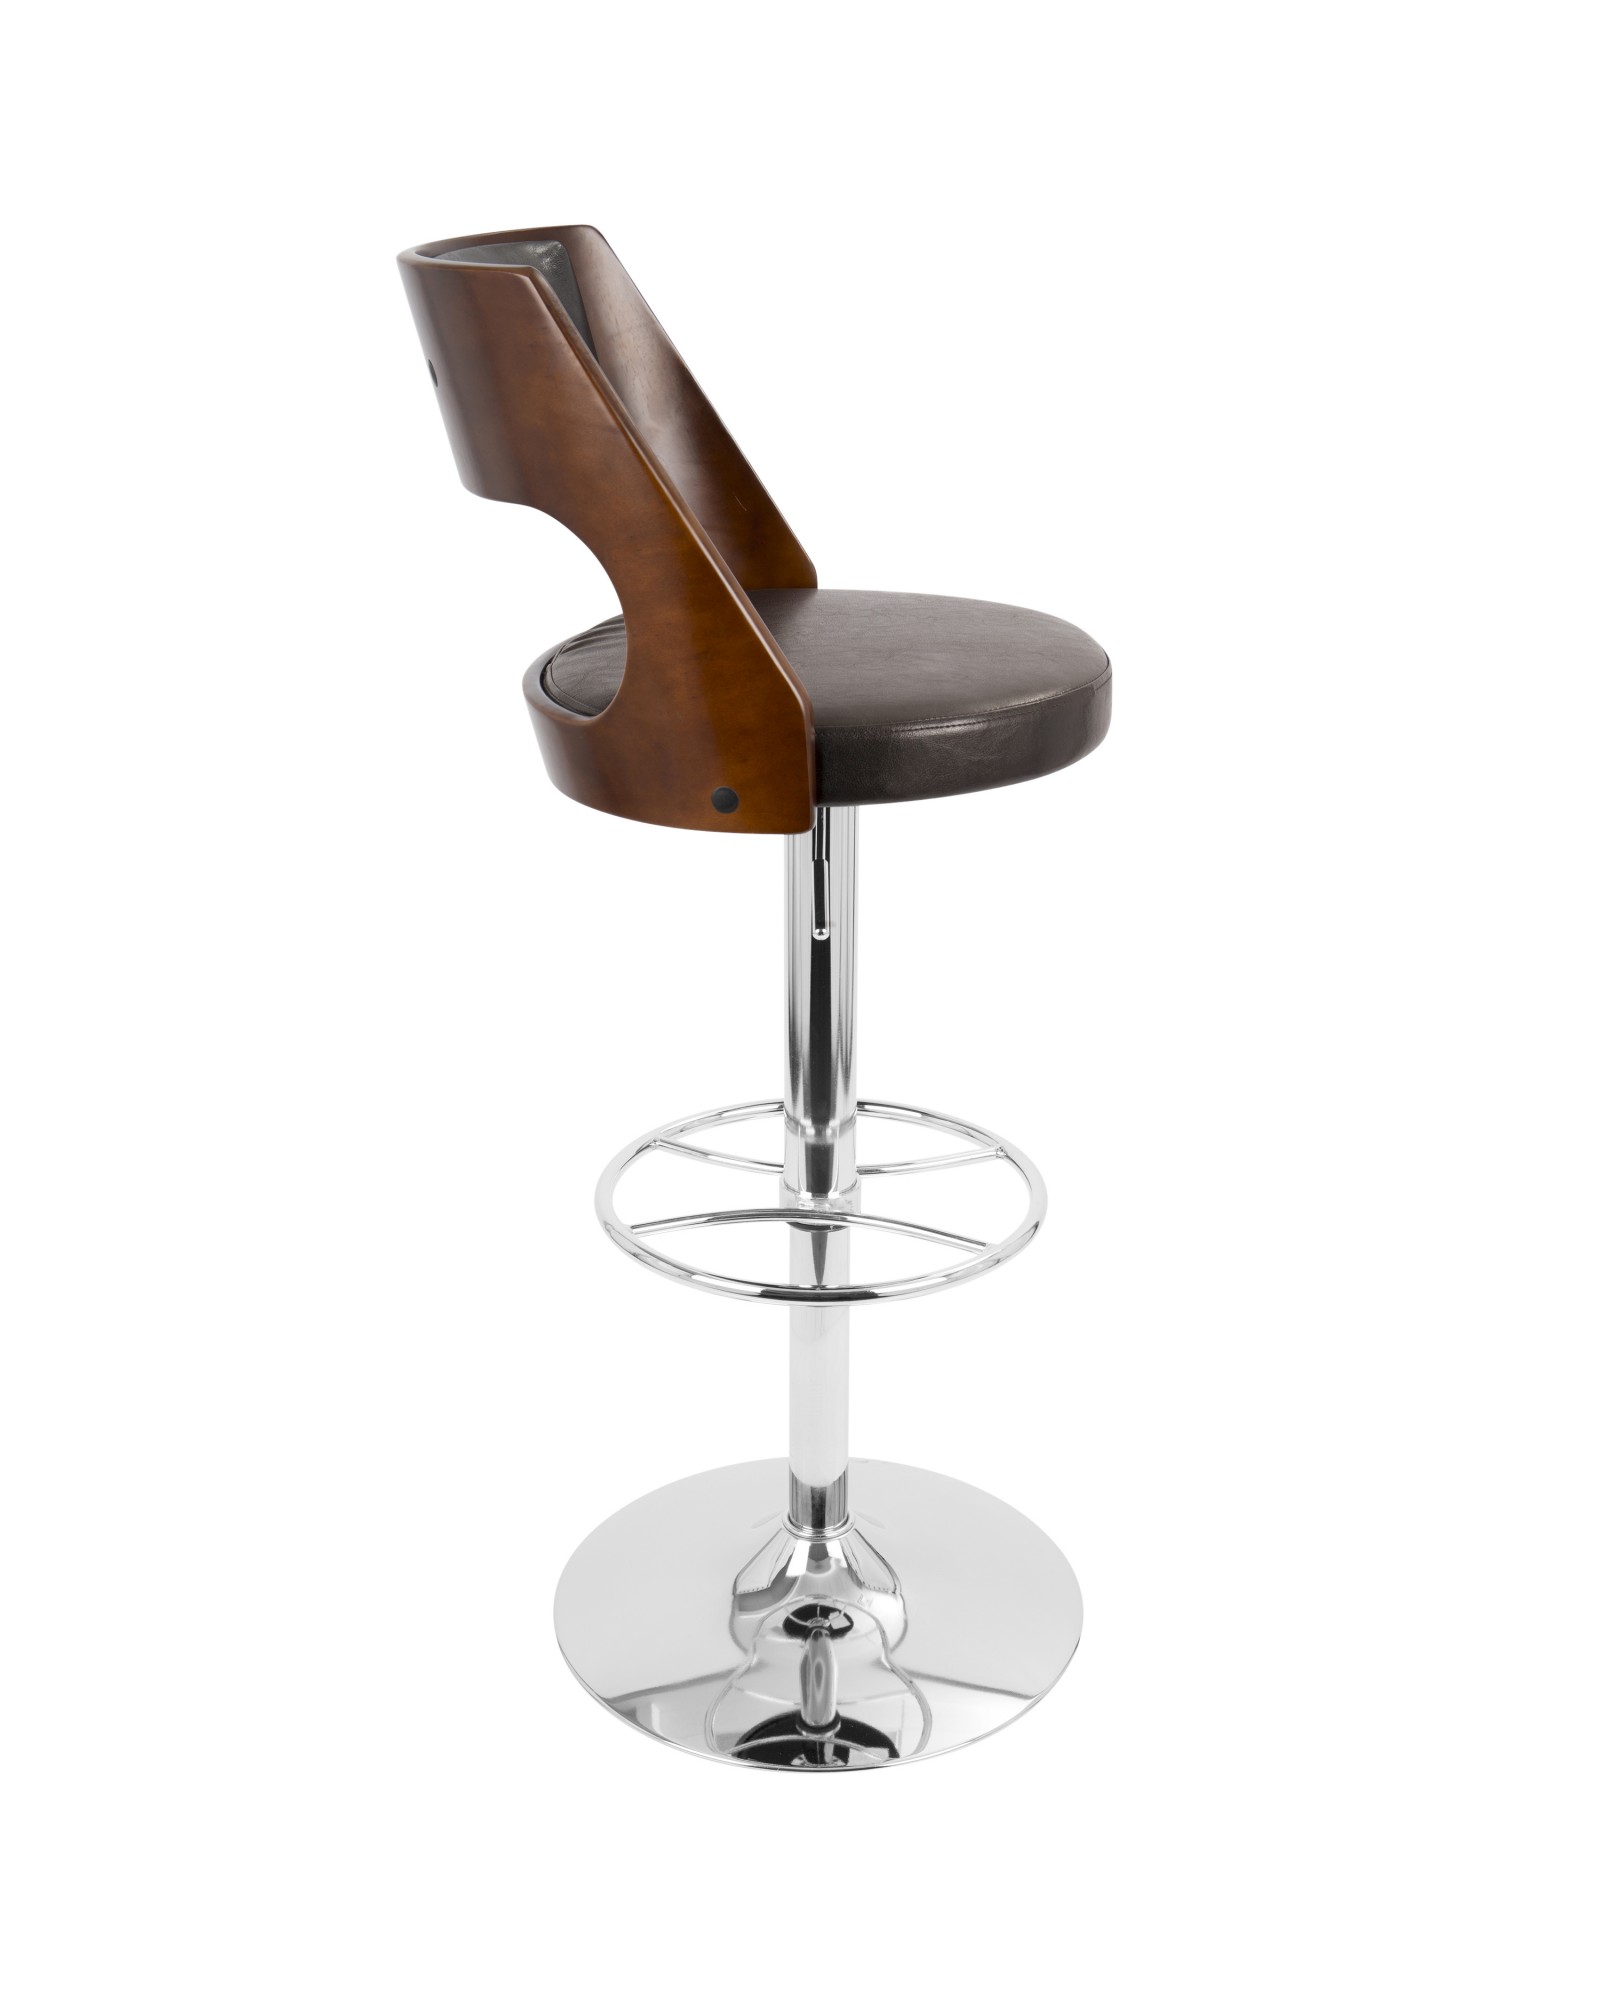 Presta Mid-Century Modern Adjustable Barstool with Swivel in Cherry and Brown Faux Leather